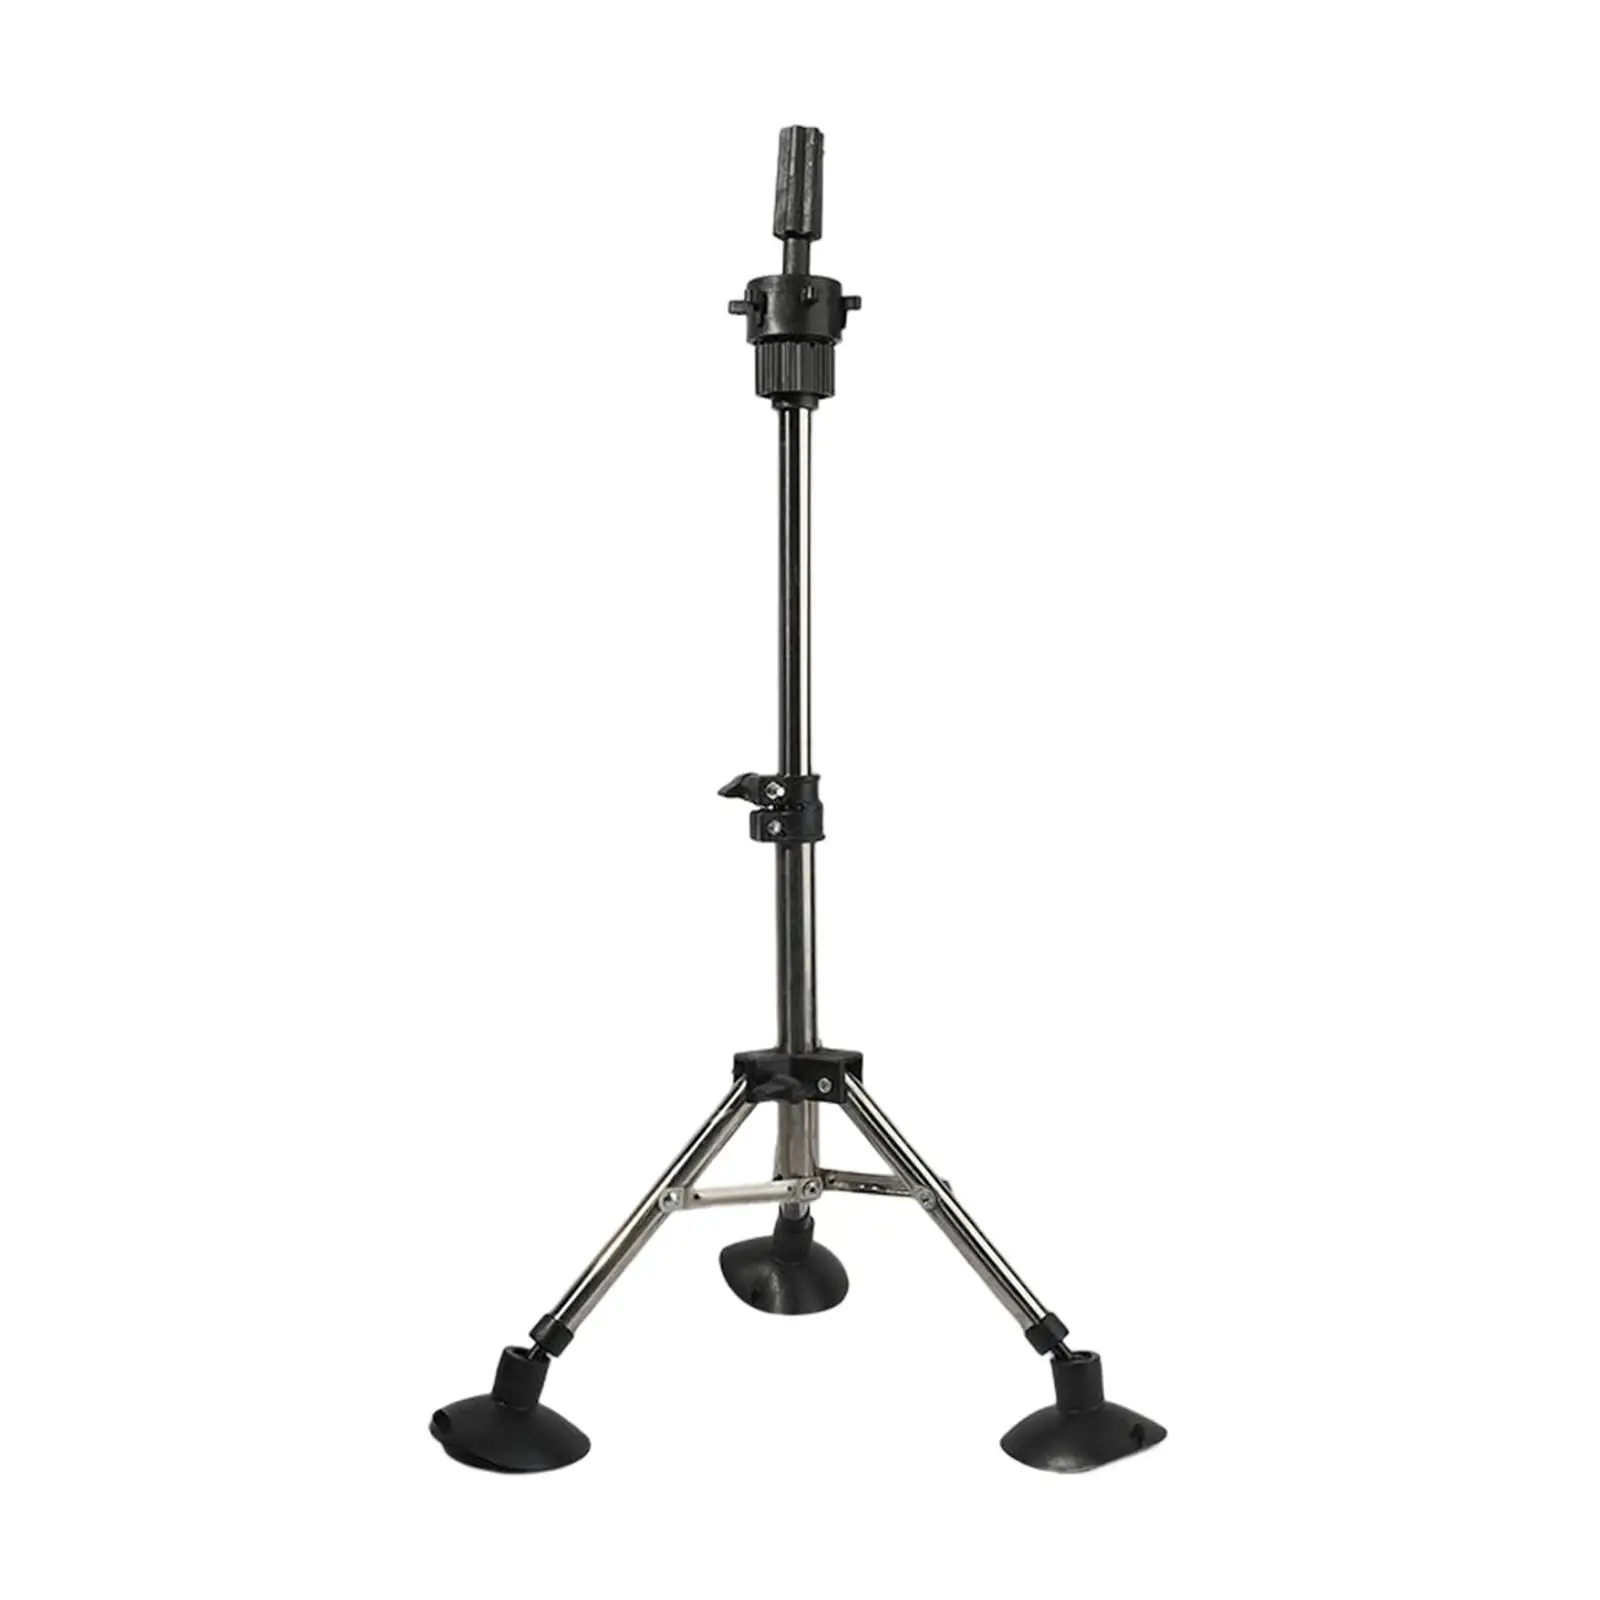 Wig Head Stand Tripod Protable Stable for Cosmetology Hairdressing Training